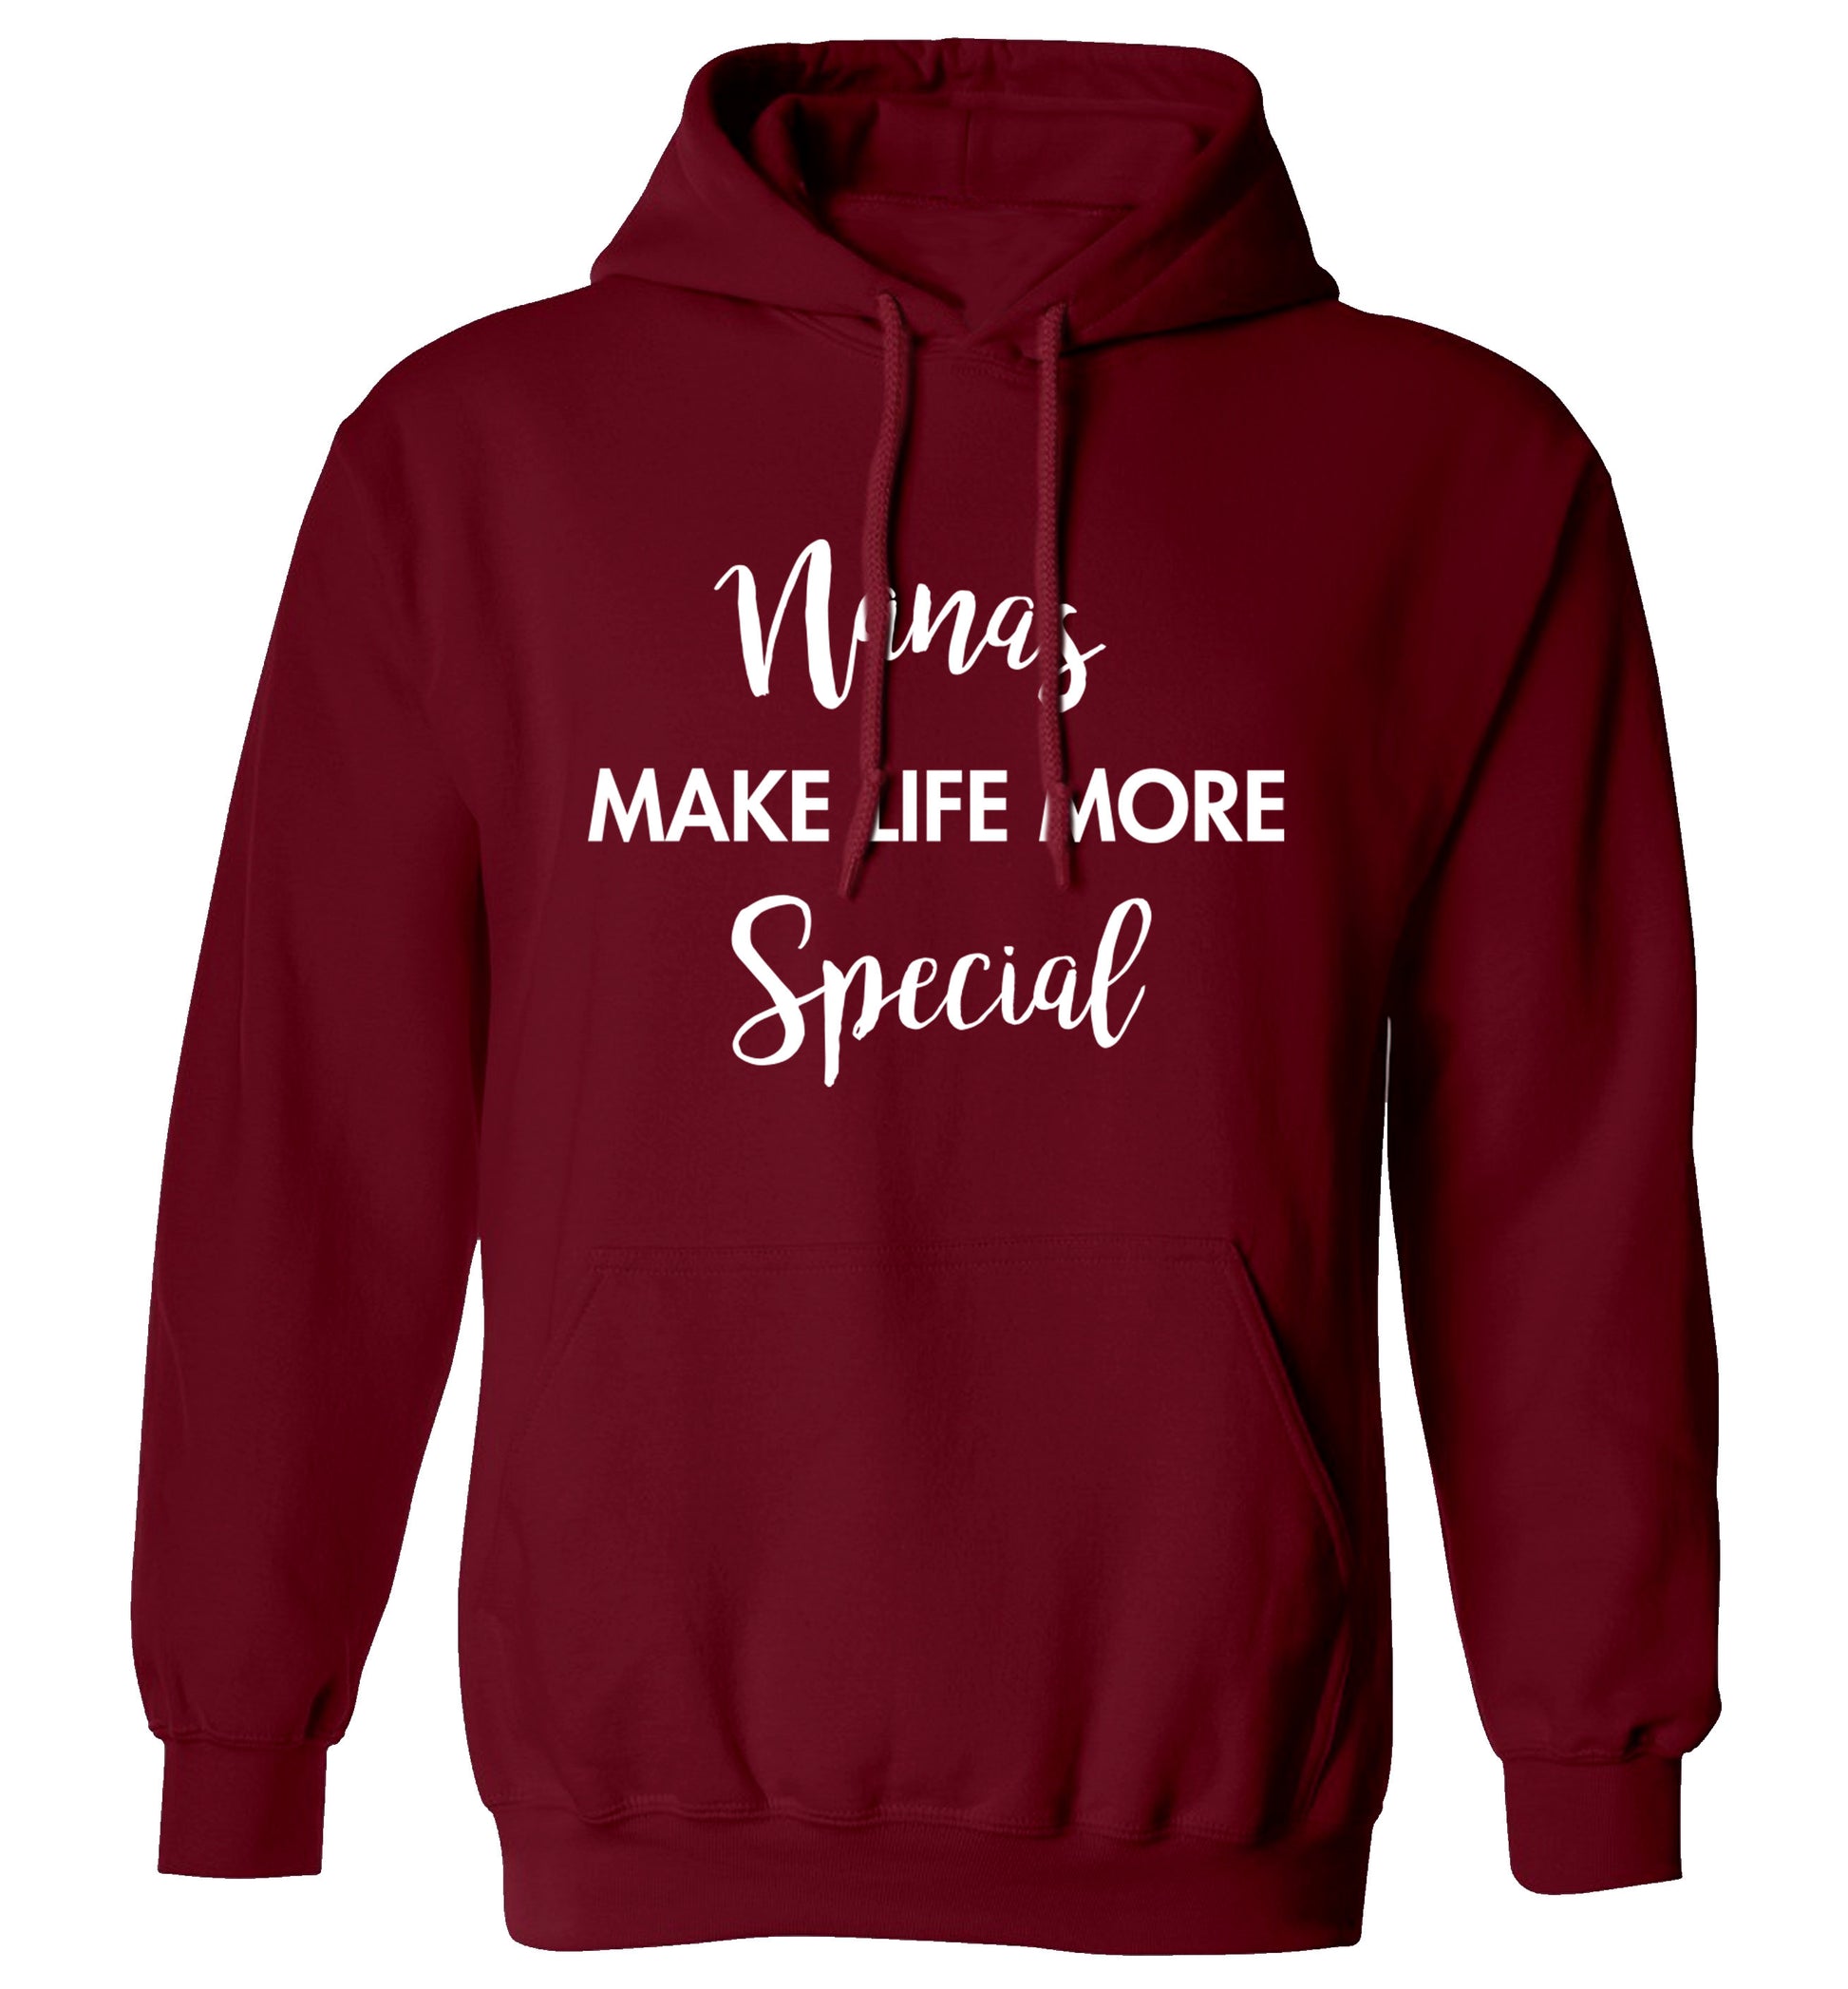 Nanas make life more special adults unisex maroon hoodie 2XL